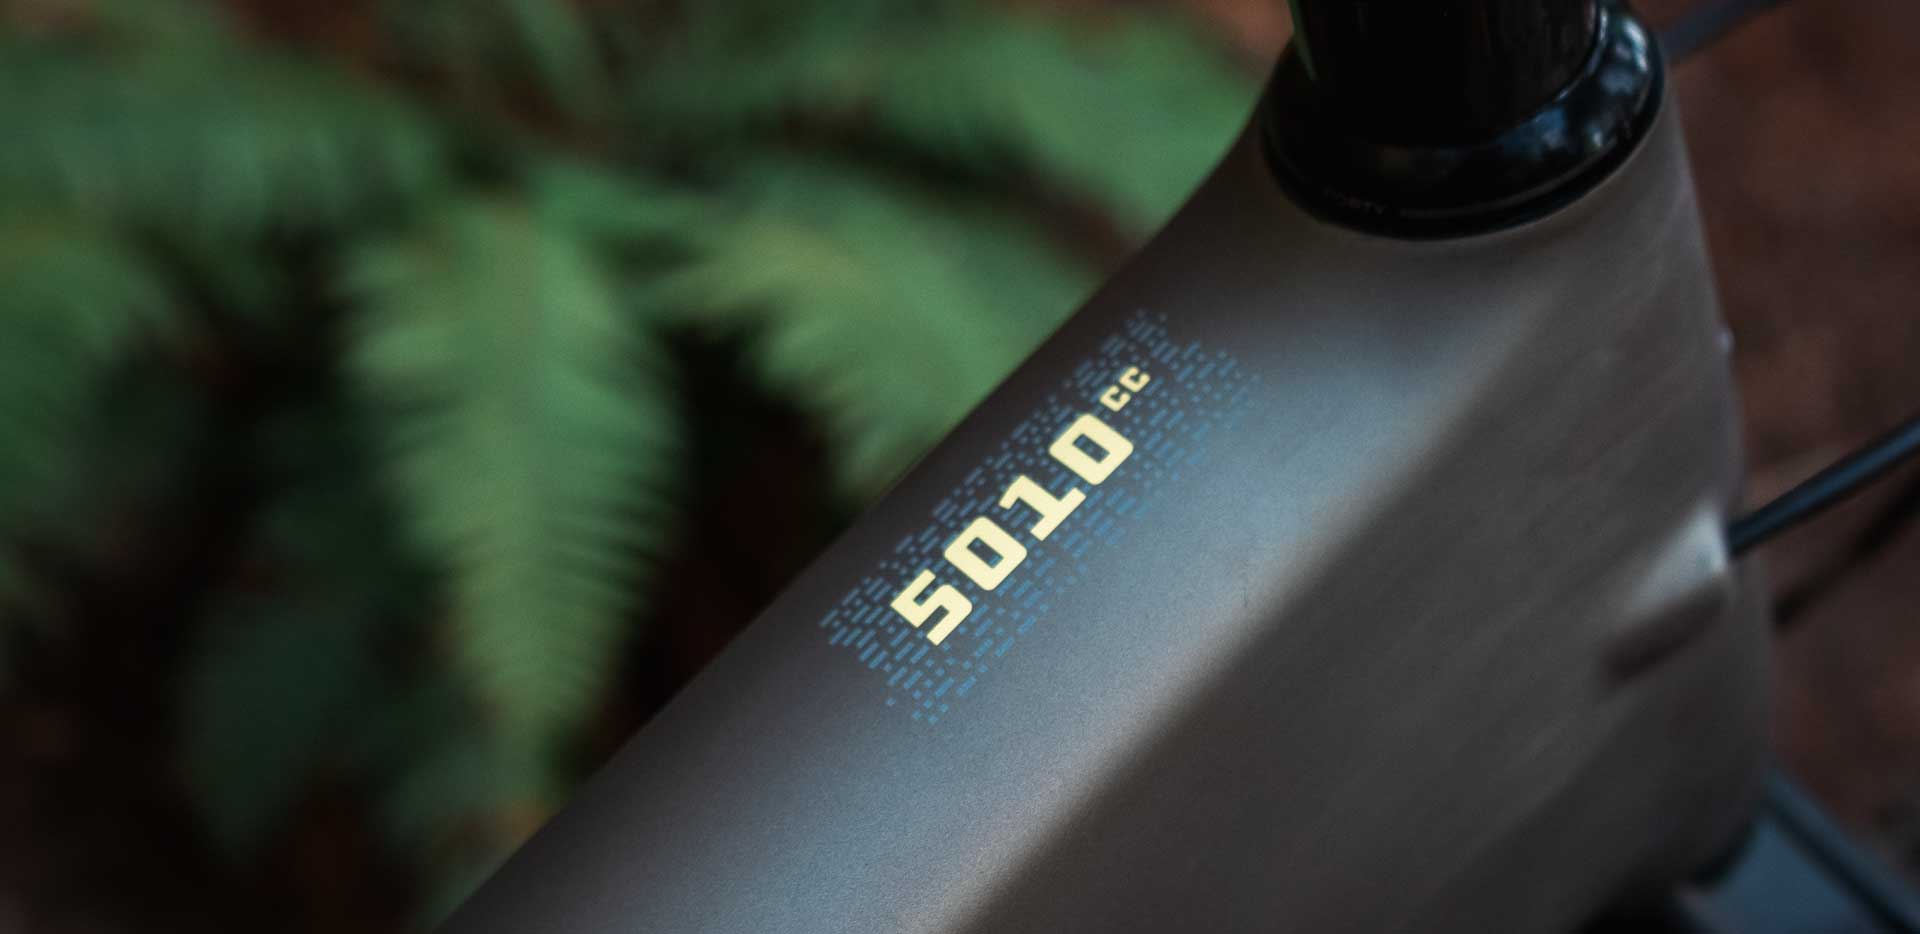 The new Santa Cruz 5010 | First Ride and Release